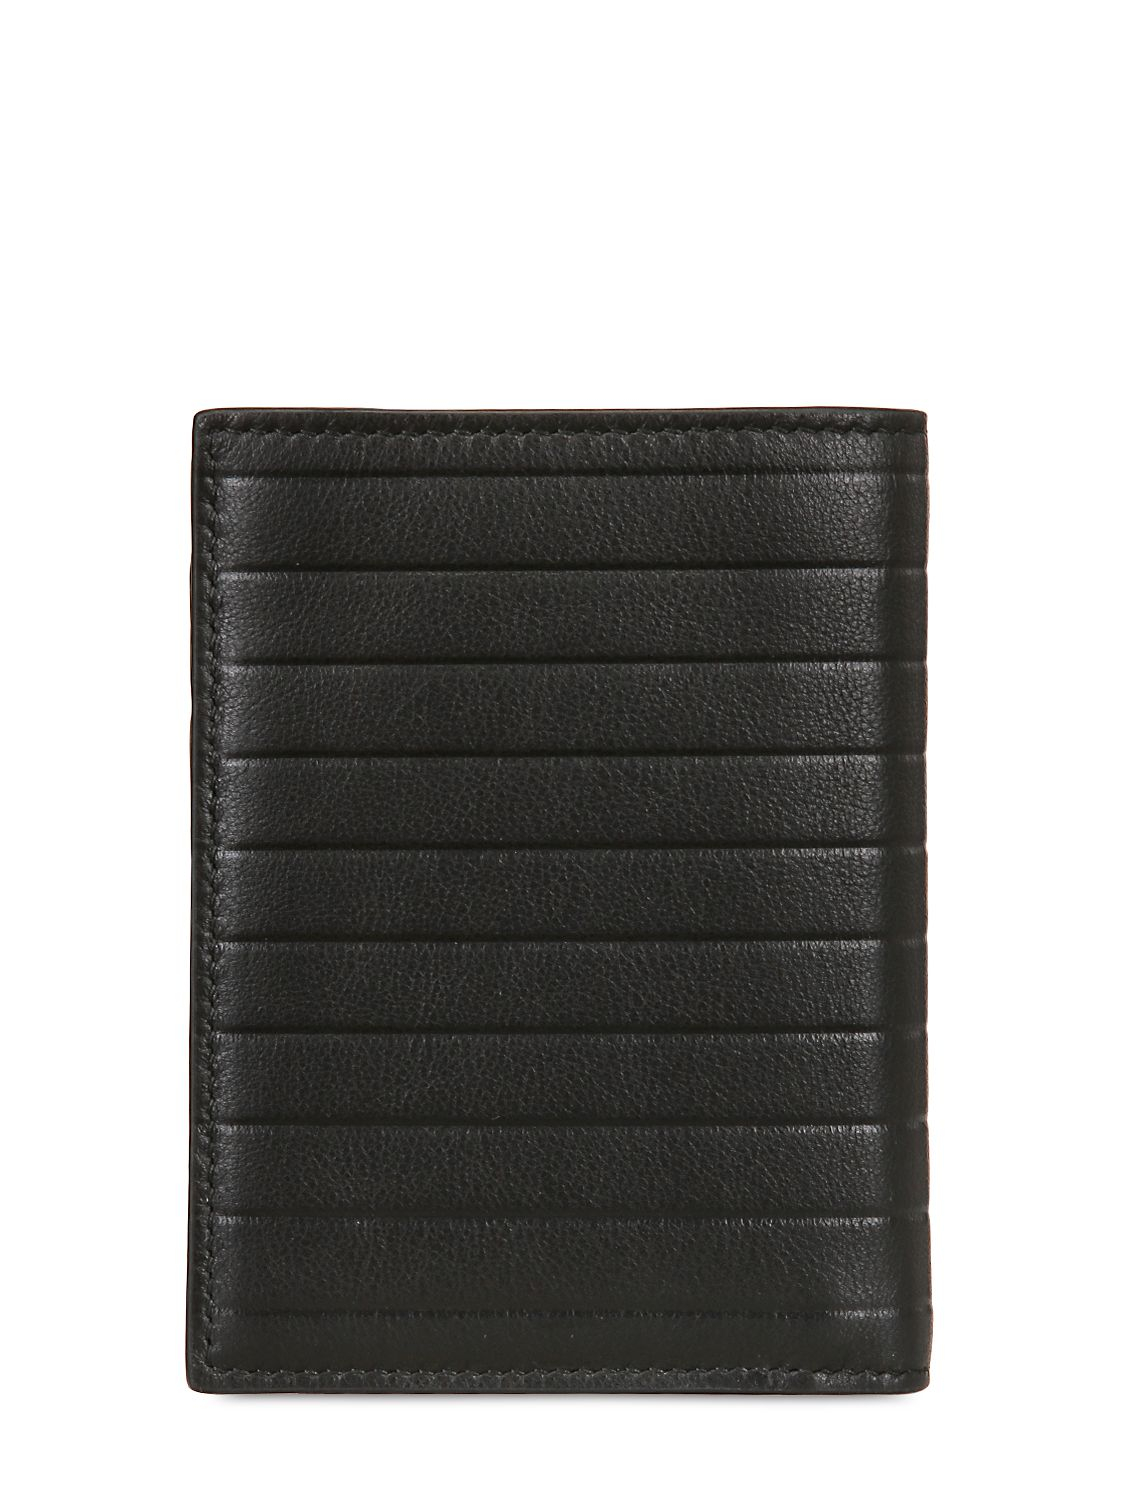 Lyst - Dior Homme Pleated Soft Leather Compact Wallet in Black for Men